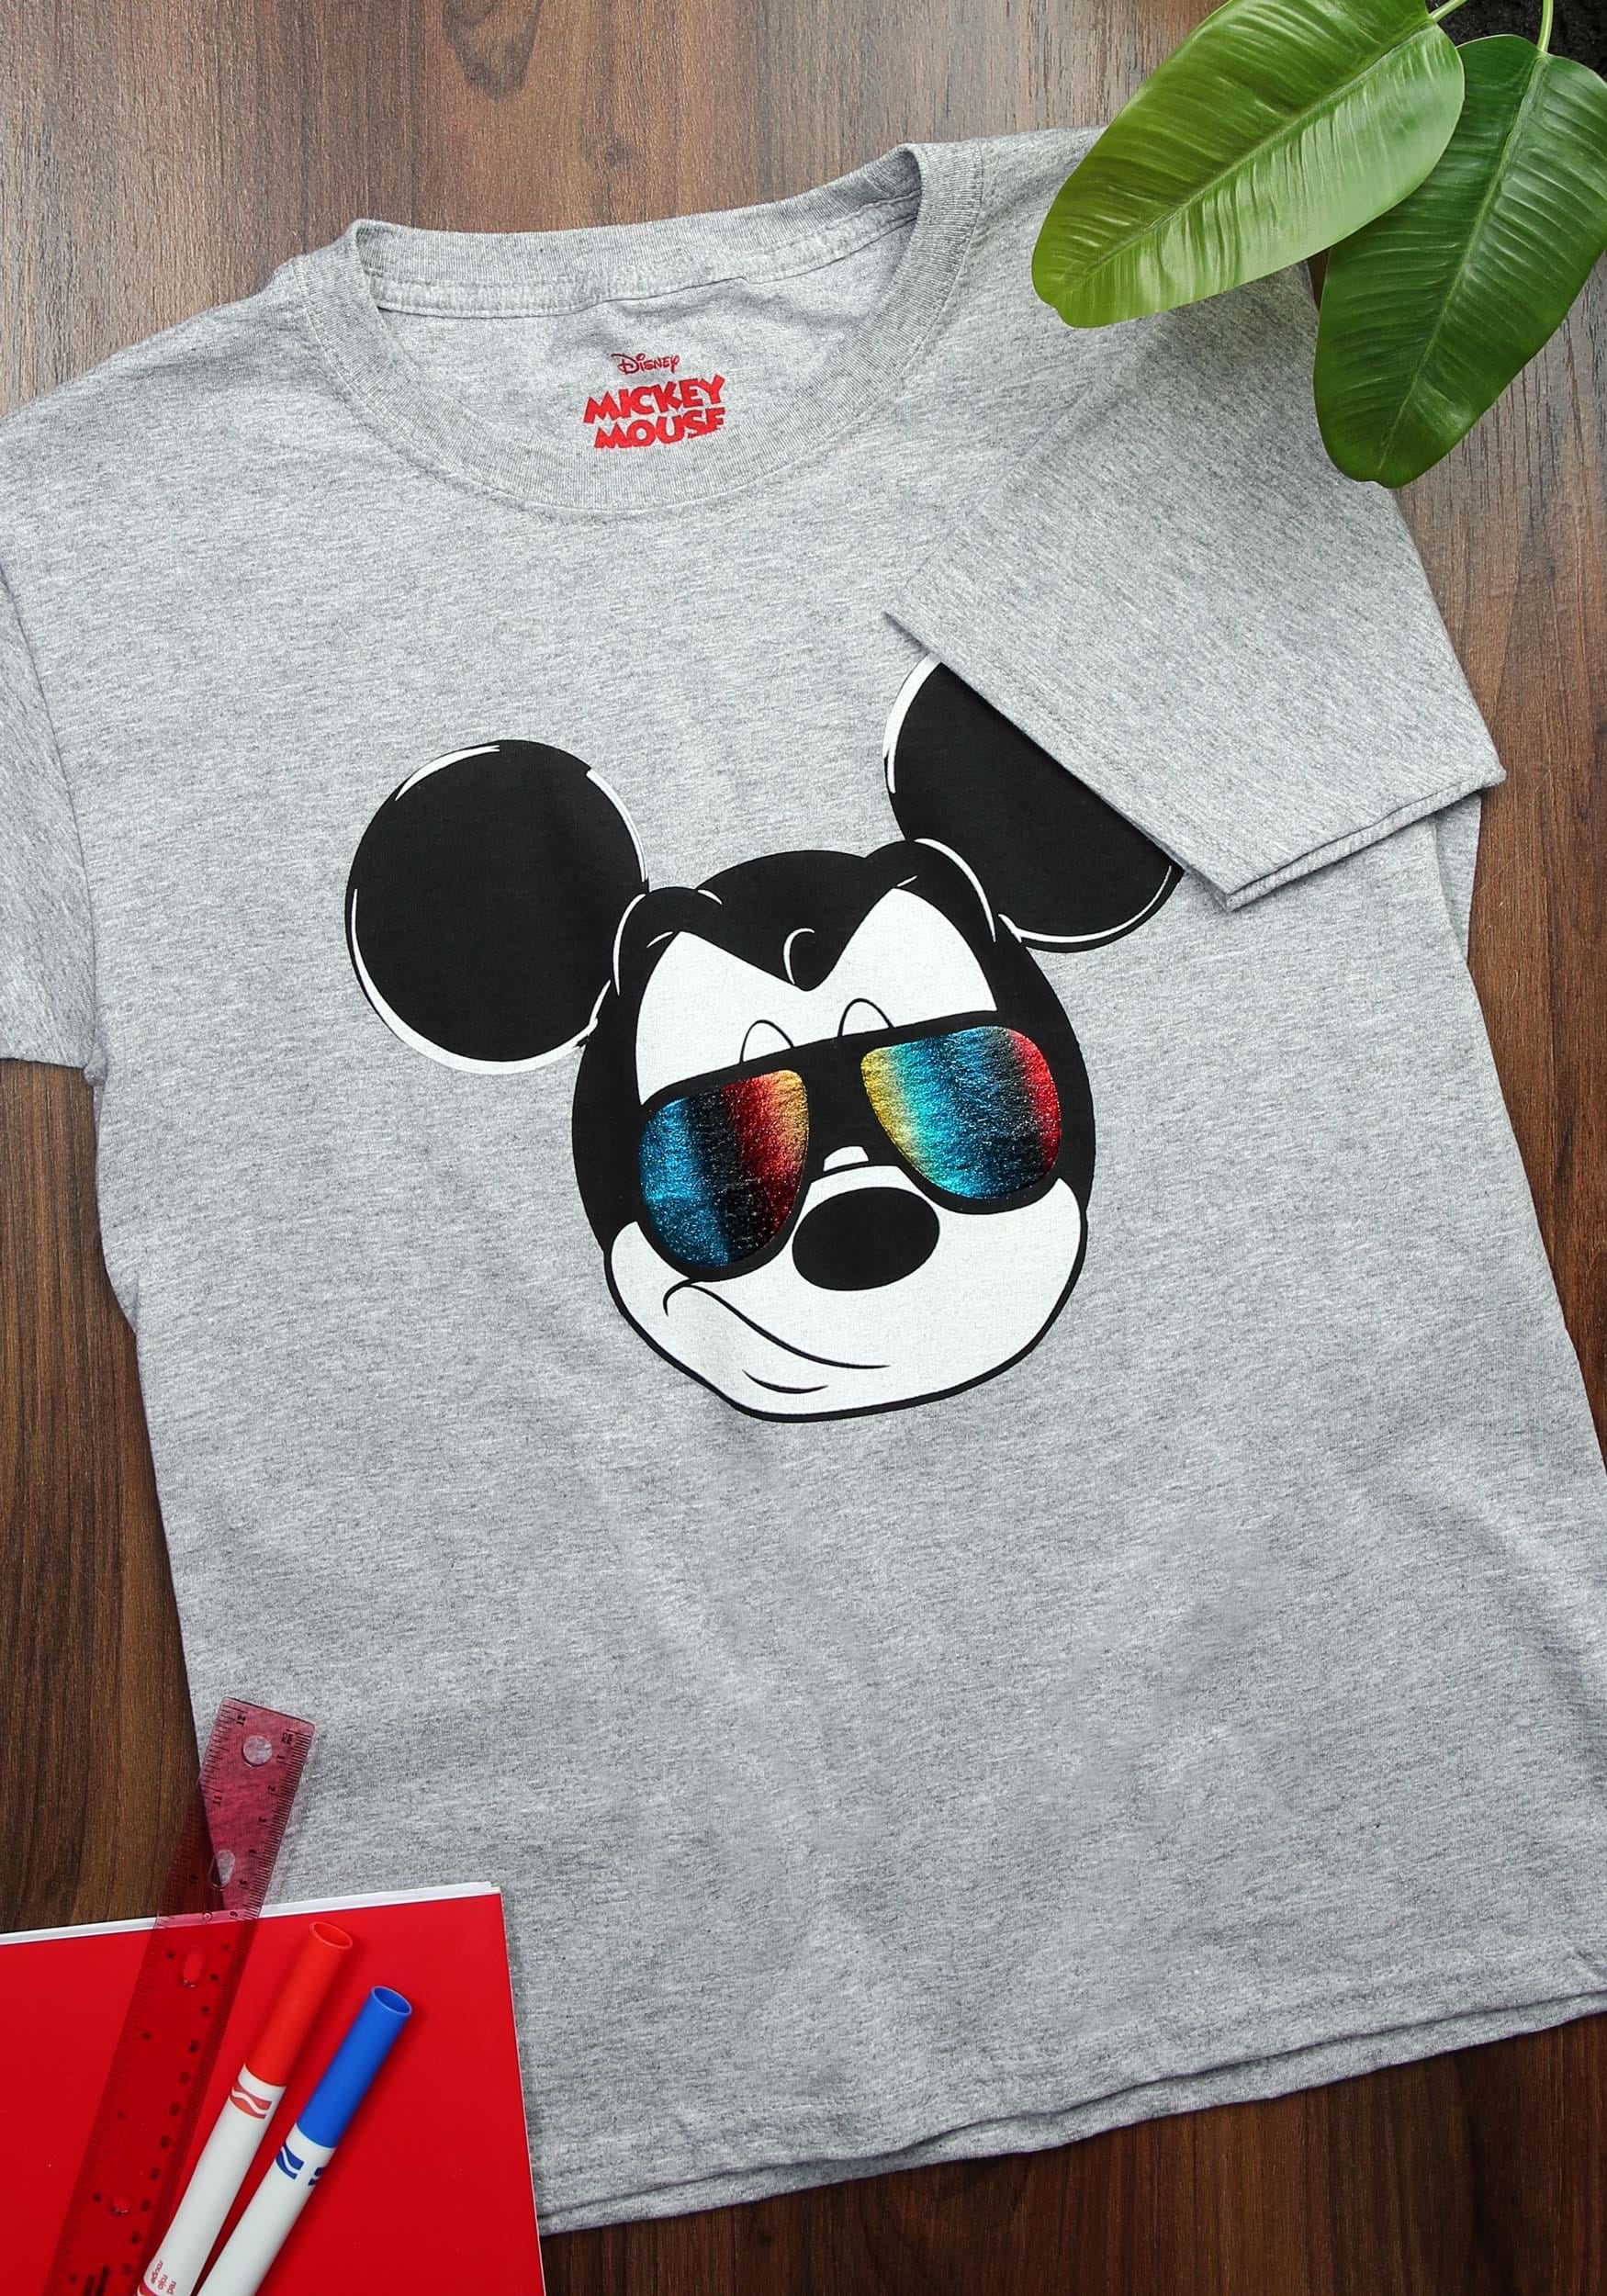 https://images.fun.com/products/74368/1-1/boys-youth-mickey-mouse-rainbow-foil-glasses-shirt.jpg